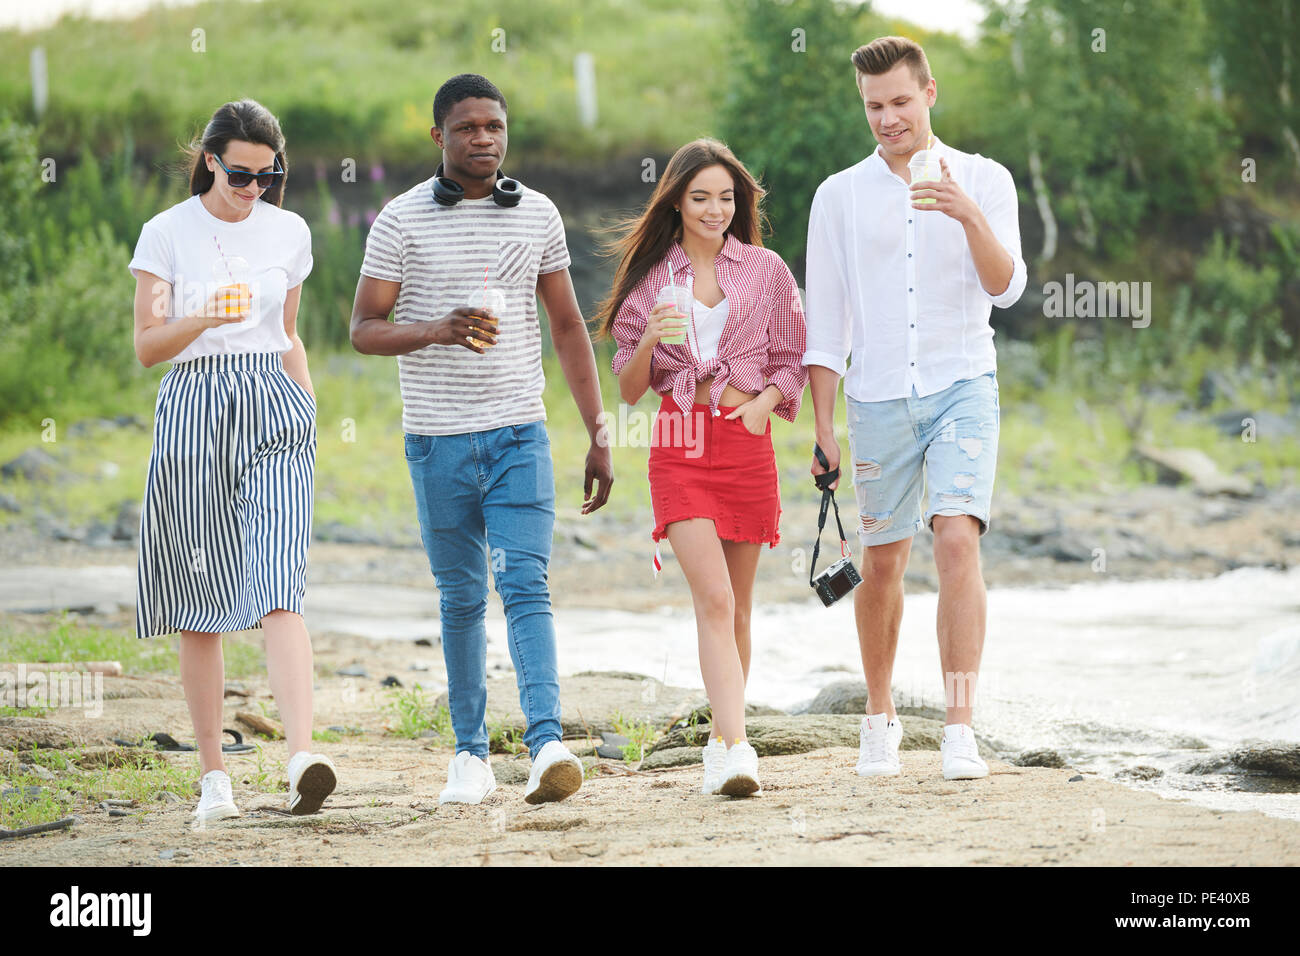 Young people walking outdoors Stock Photo